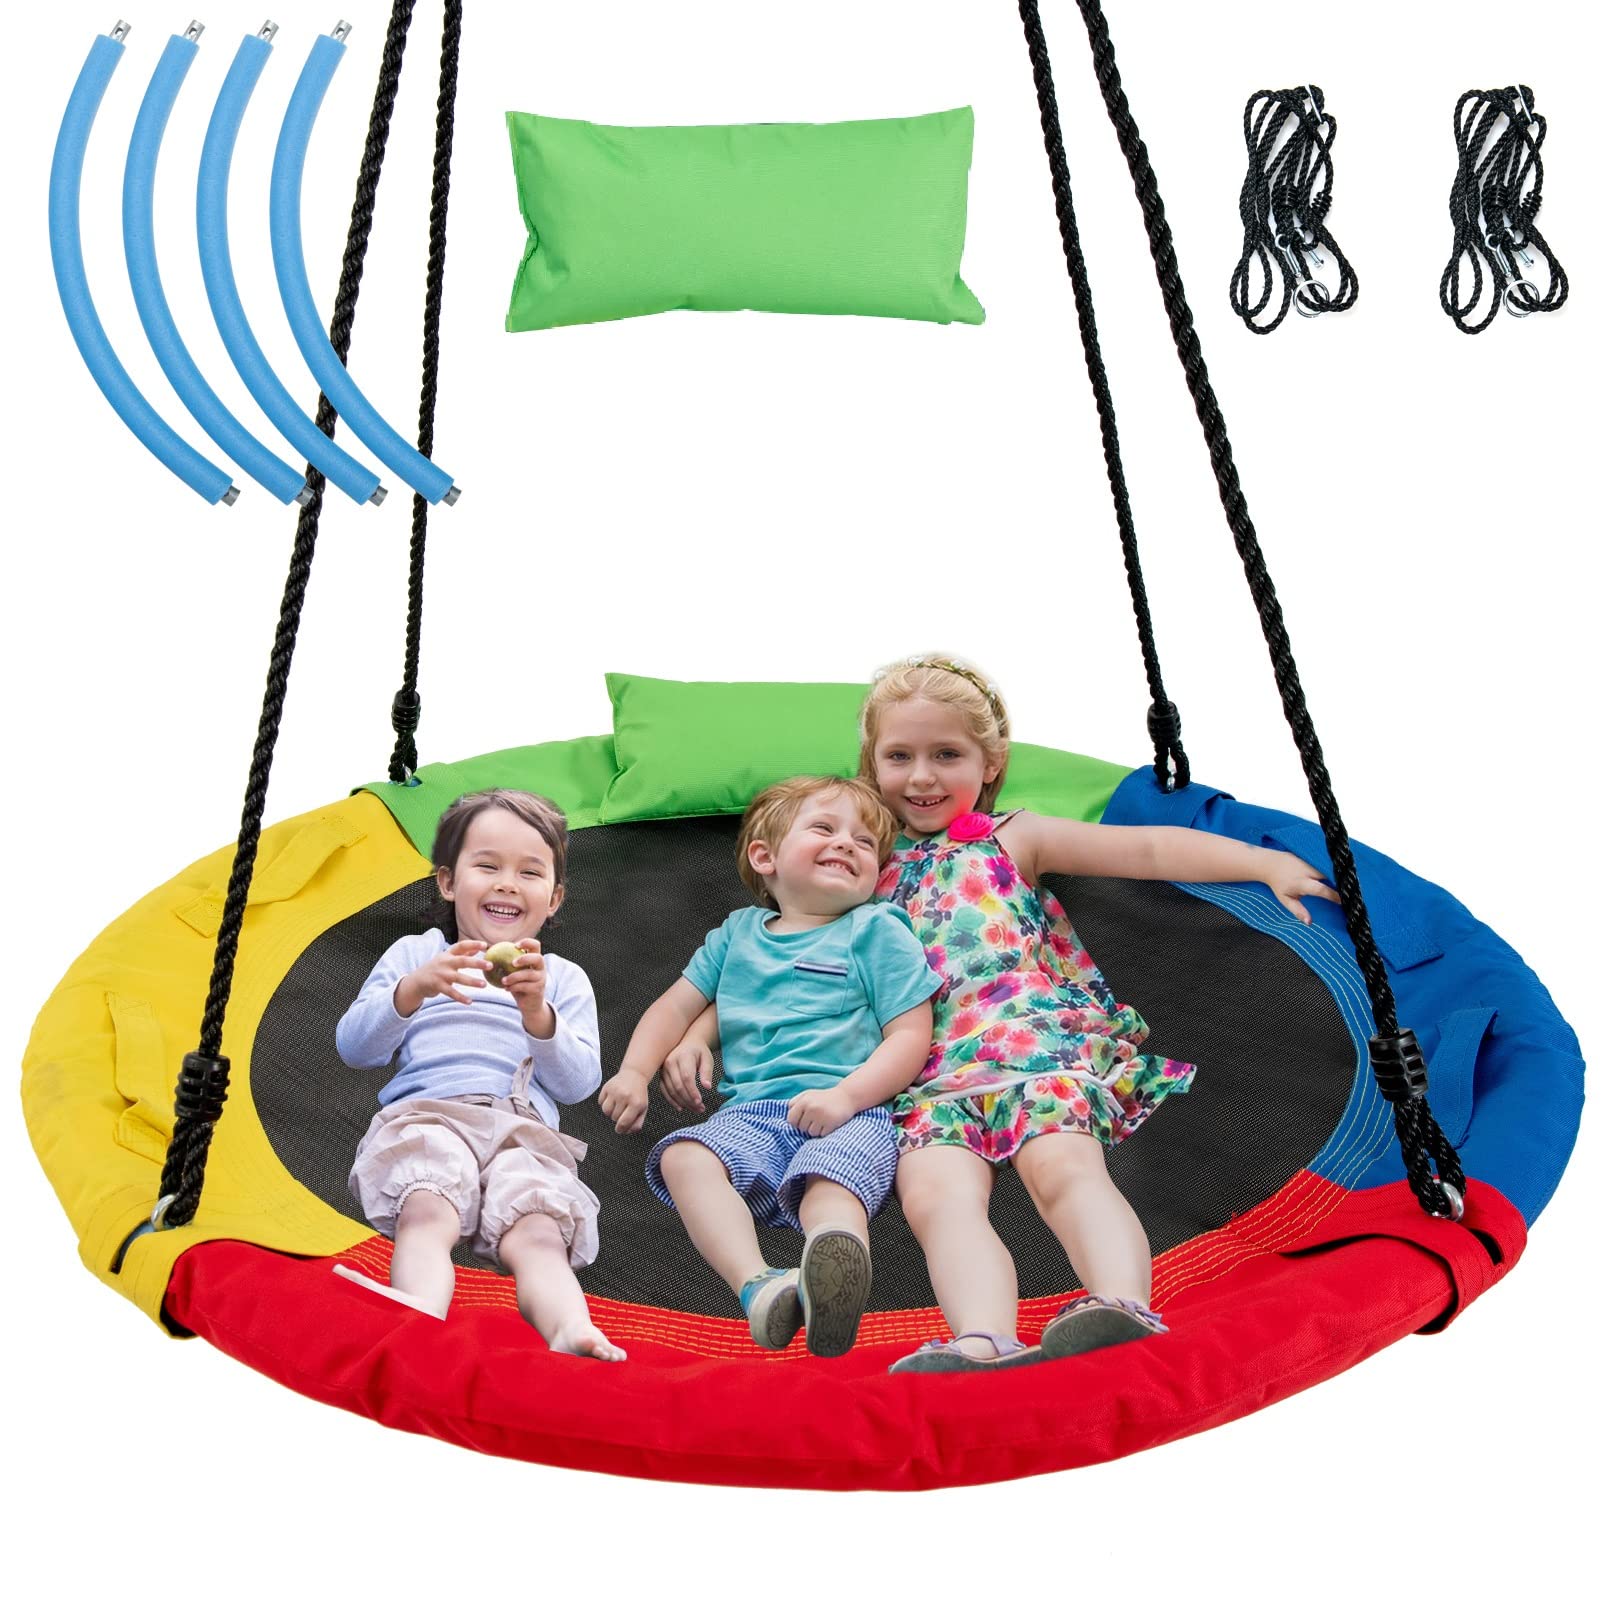 INFANS 660lbs 40 inch Saucer Tree Swing, Round Flying Swing Seat for Kids, Outdoor Round Platform Swing, Colorful